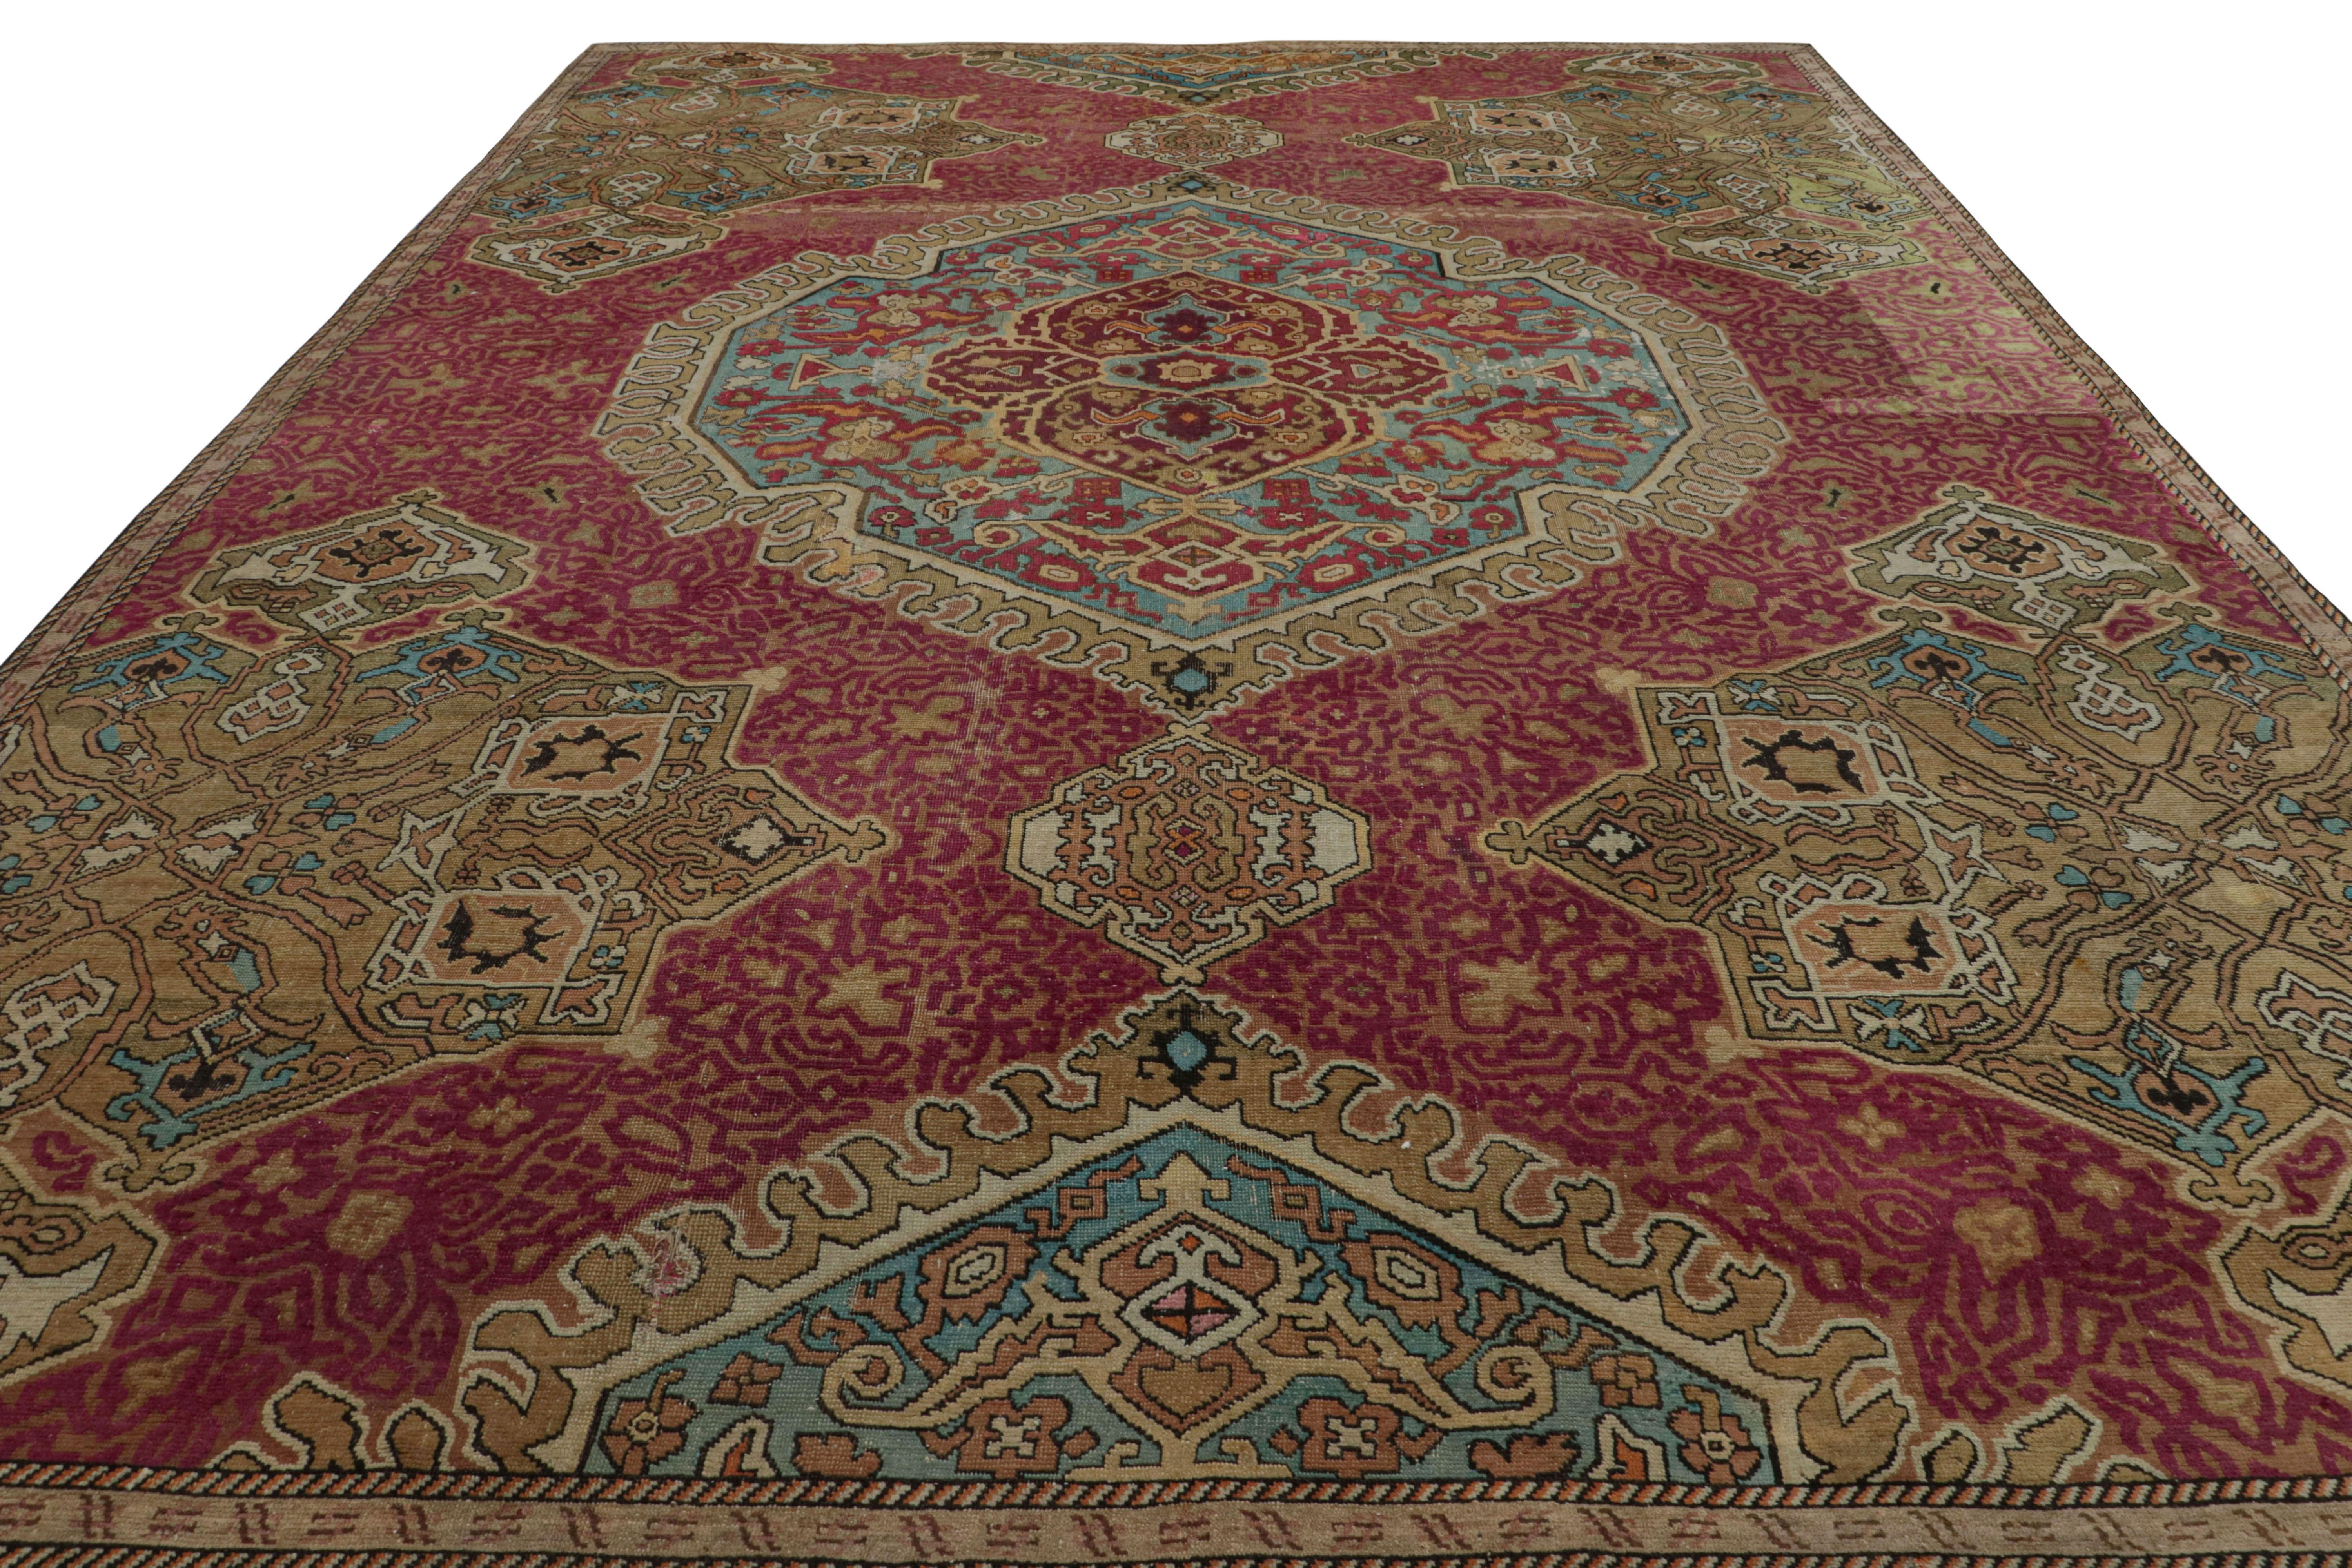 French Antique Aubusson Rug in Red with Medallion Patterns, from Rug & Kilim  For Sale